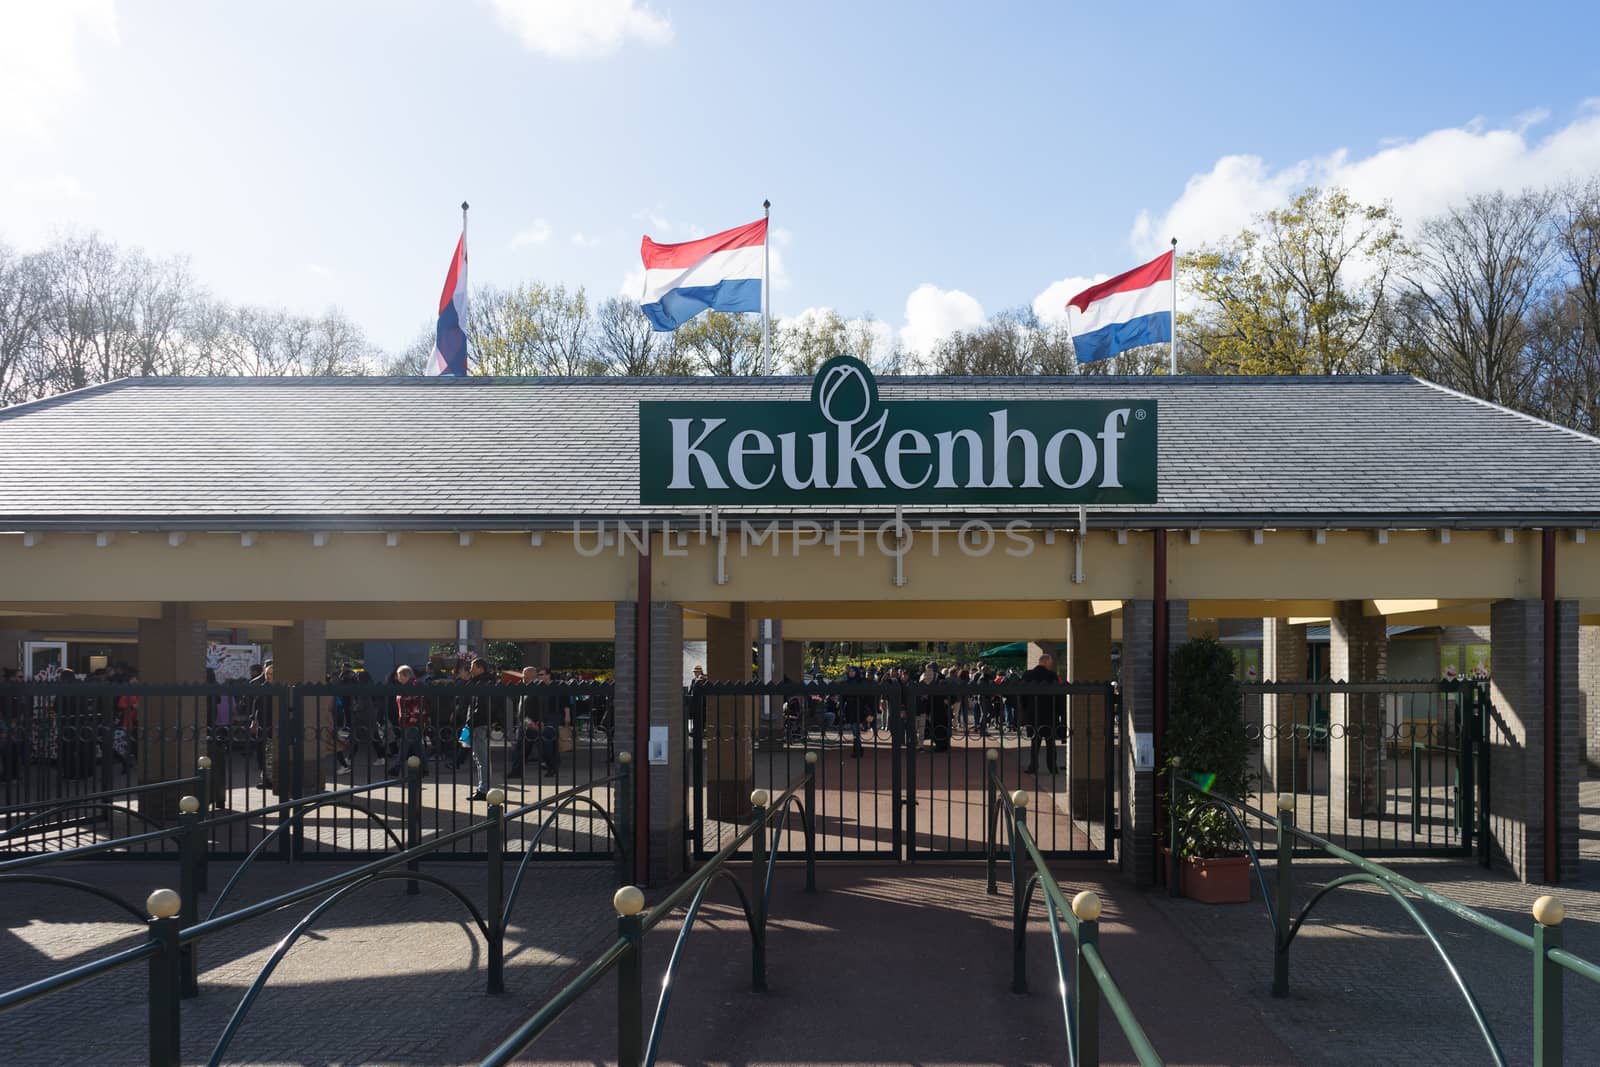 Keukenhoff, Netherlands - April 17 : The Keukenhoff Tulip Gardens on April 17, 2016. The main entrance gate to the Tulip gardens on a bright summer day